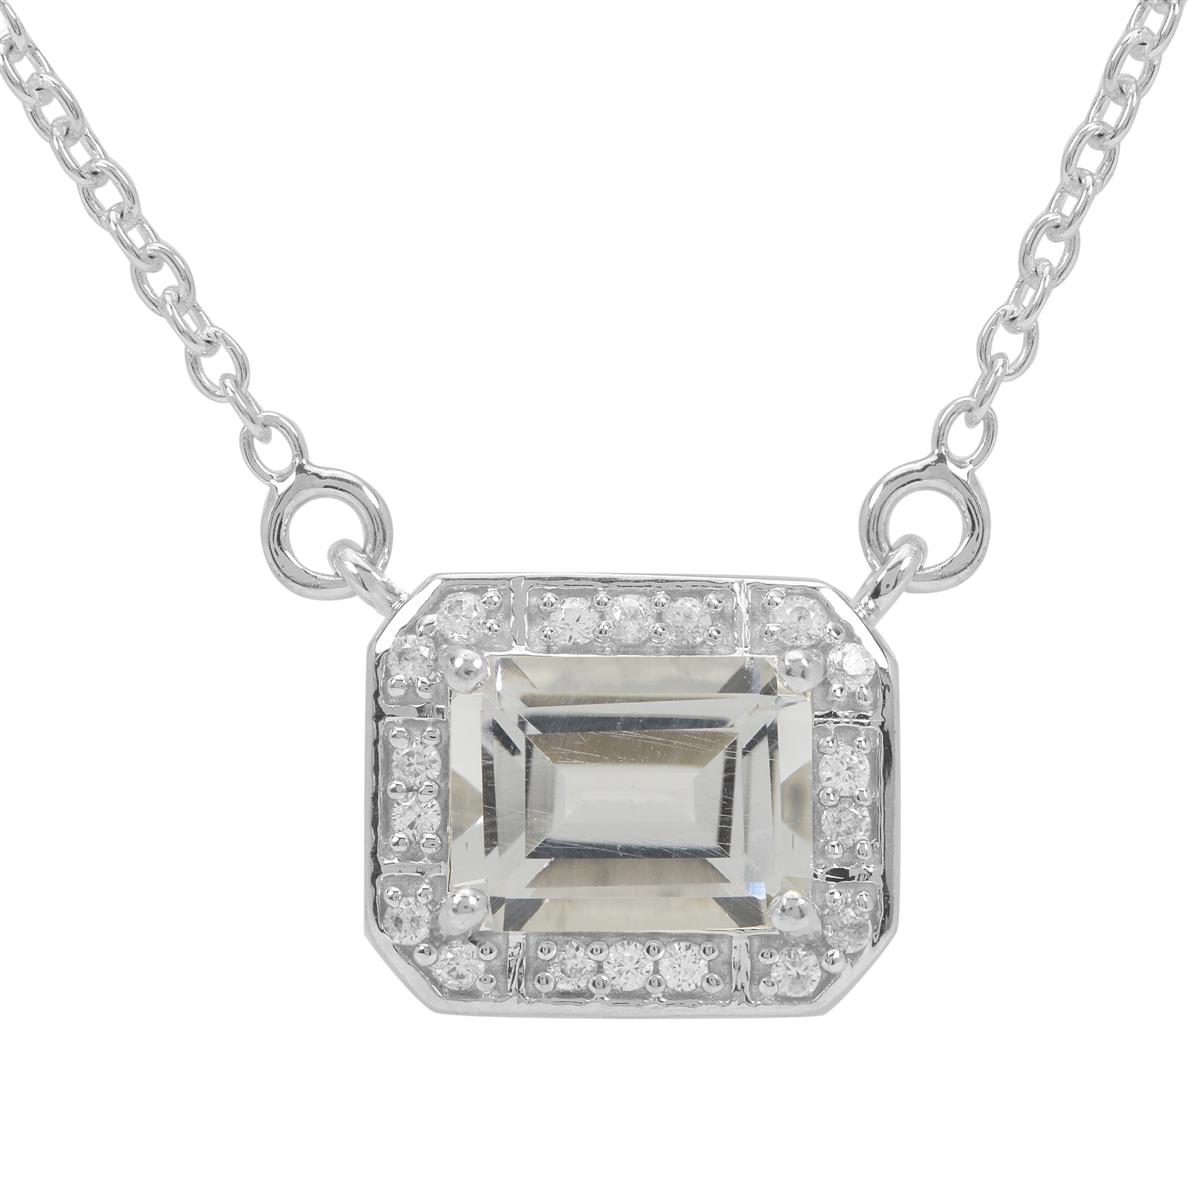 Itinga Petalite & White Zircon Sterling Silver Necklace ATGW 2.05cts ...